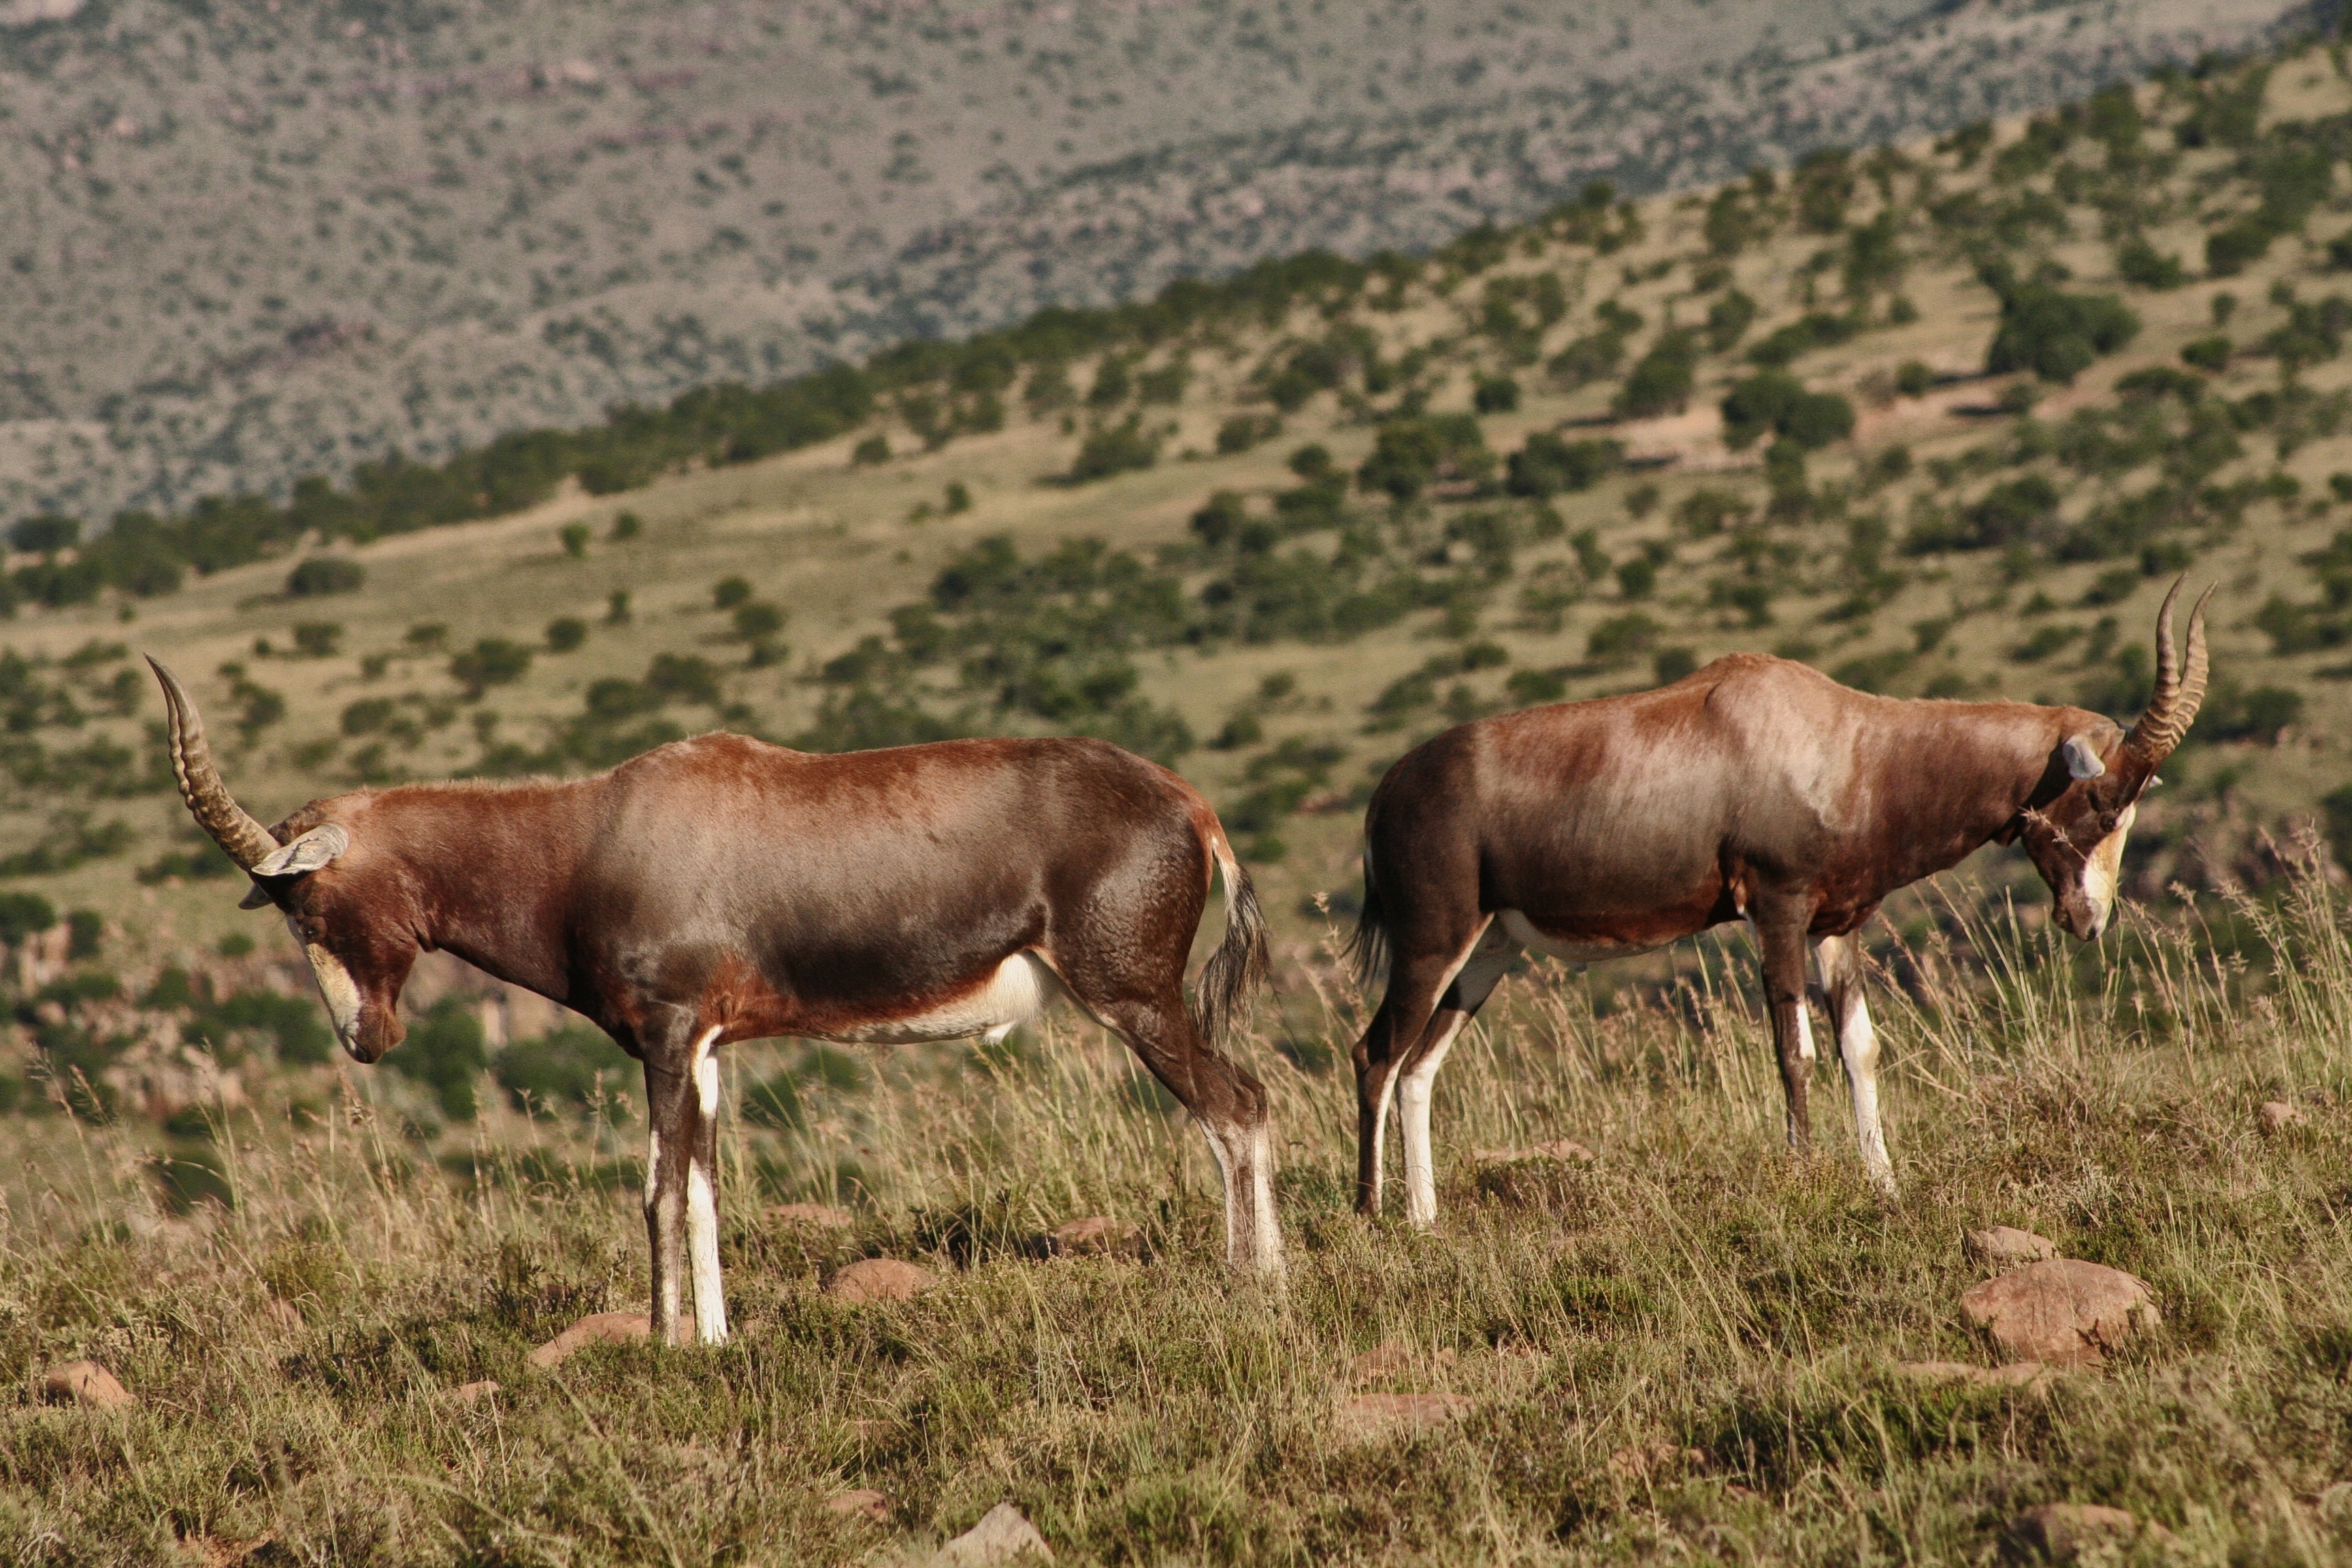 Rival bontebok males, settling their differences with quaint rituals on the high mountain plains.